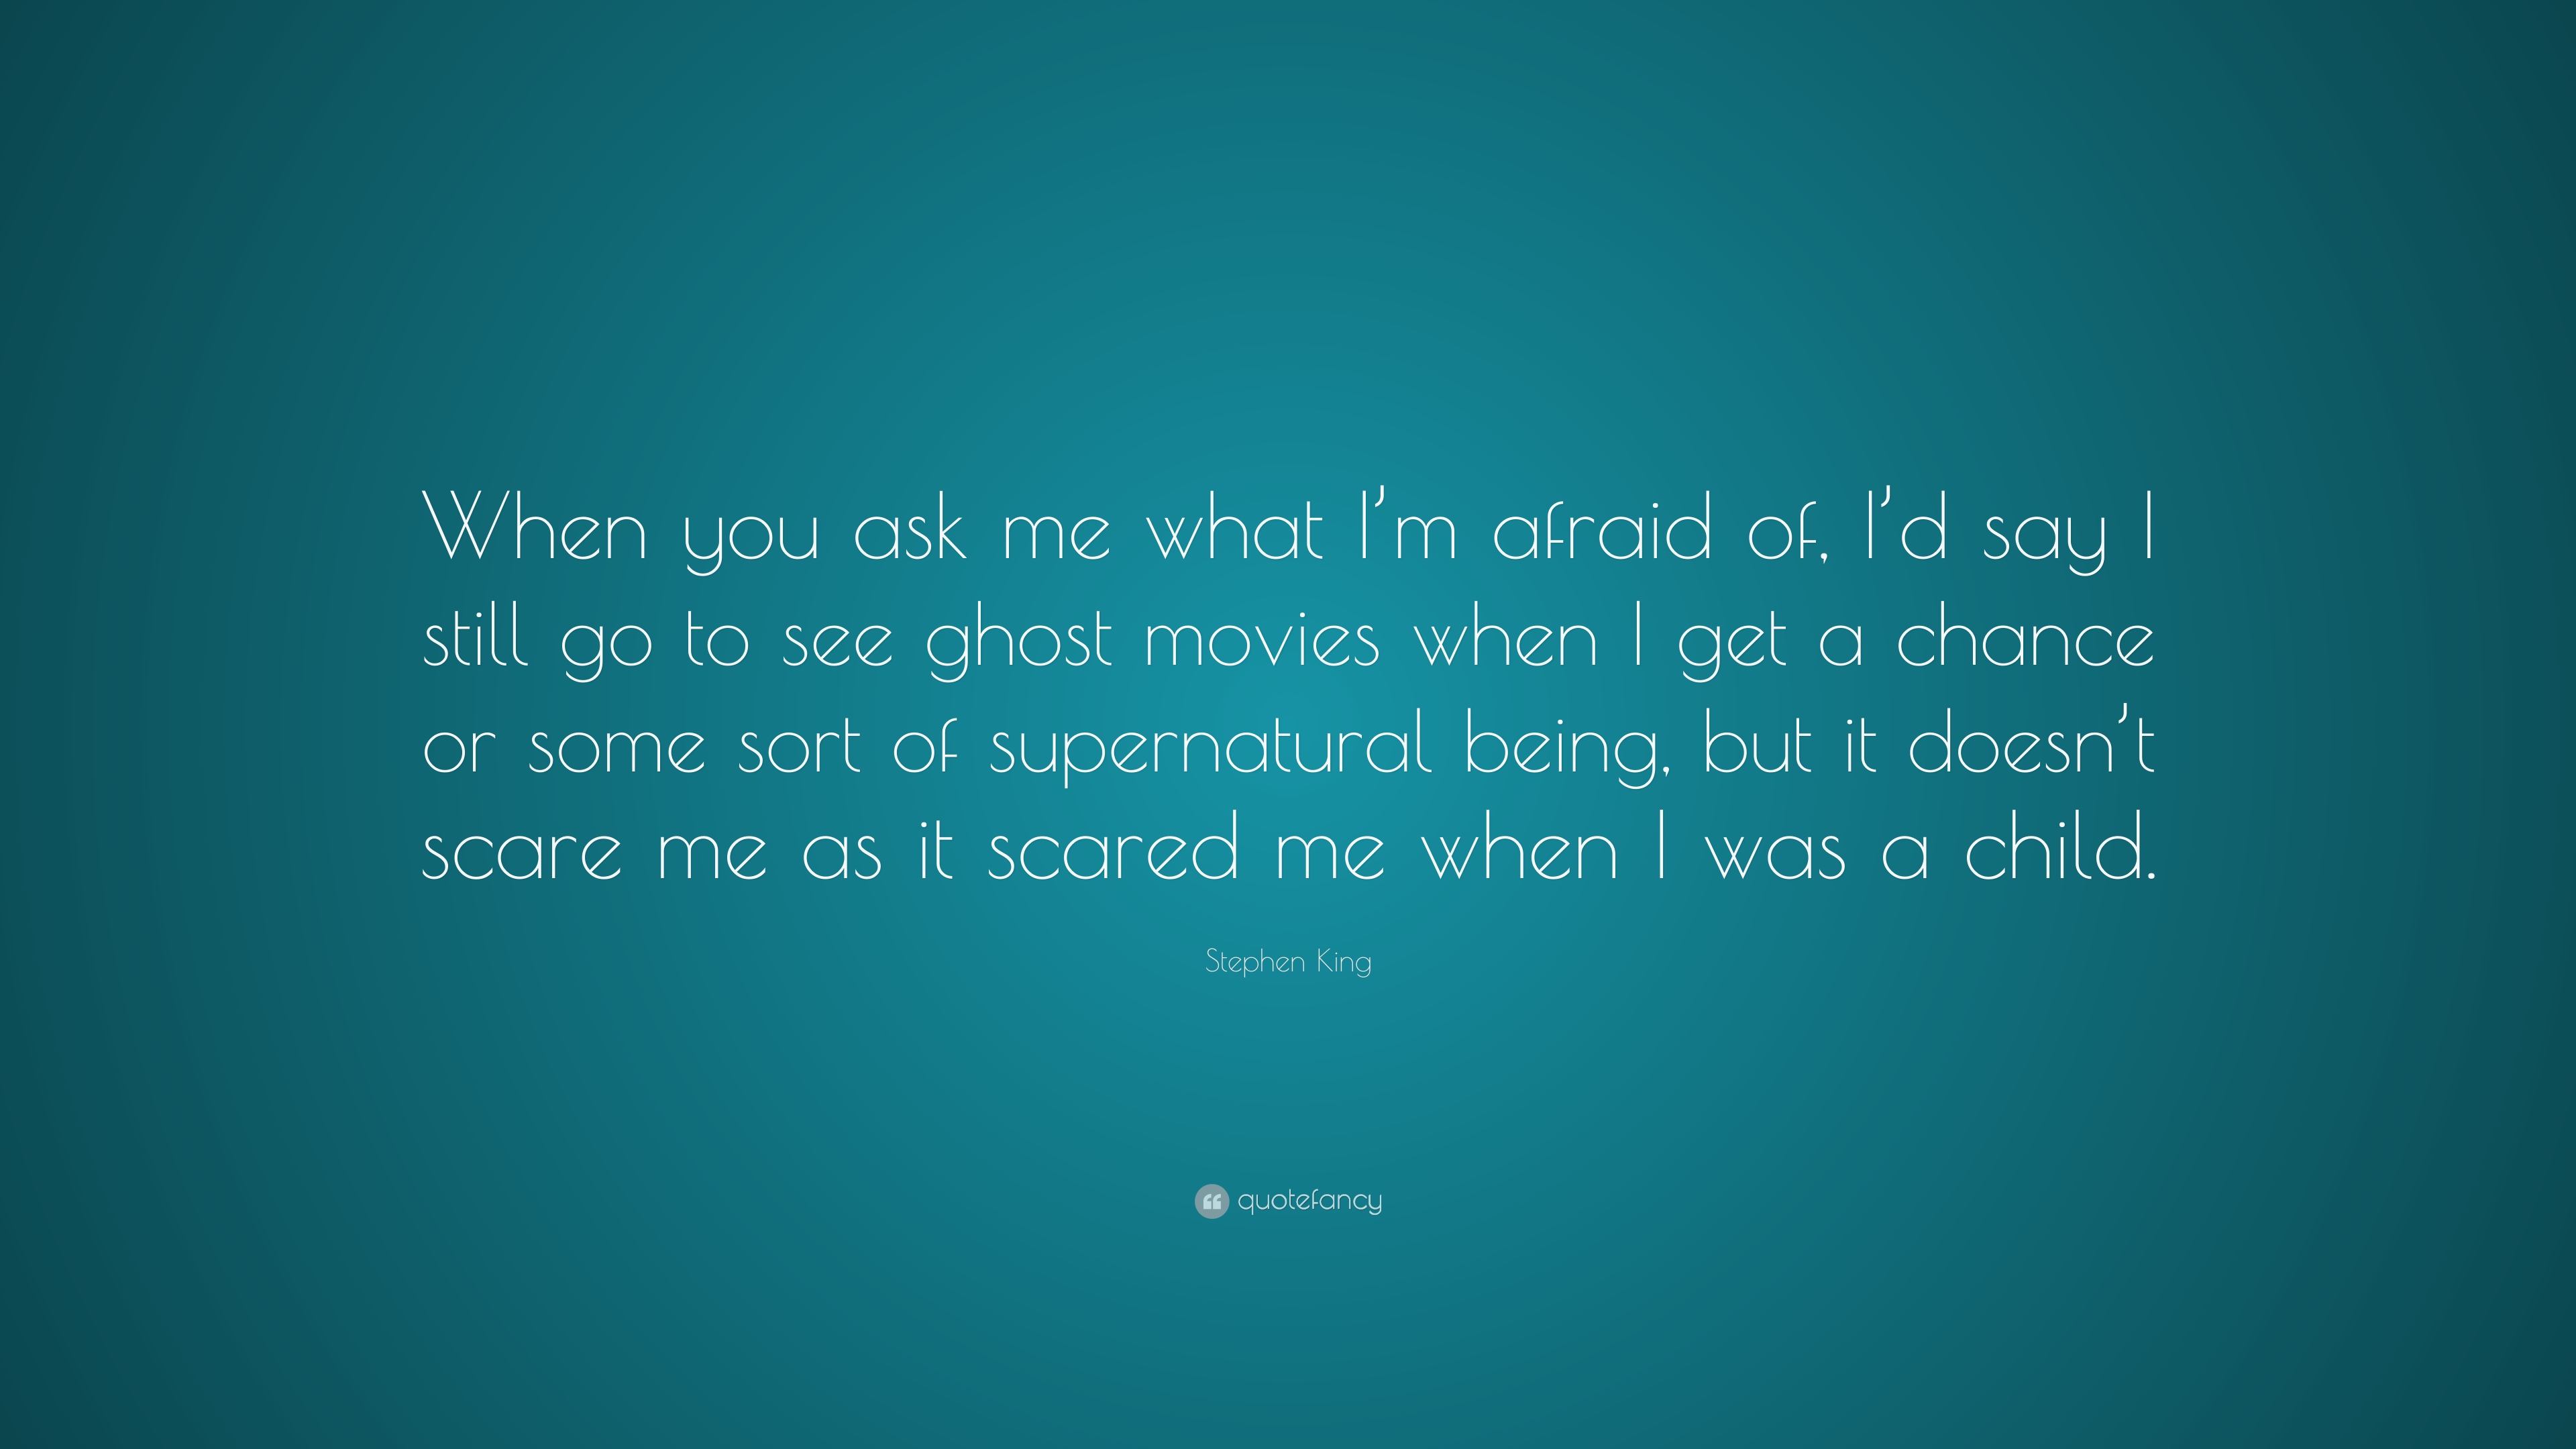 What are some Stephen King quotes about the supernatural?